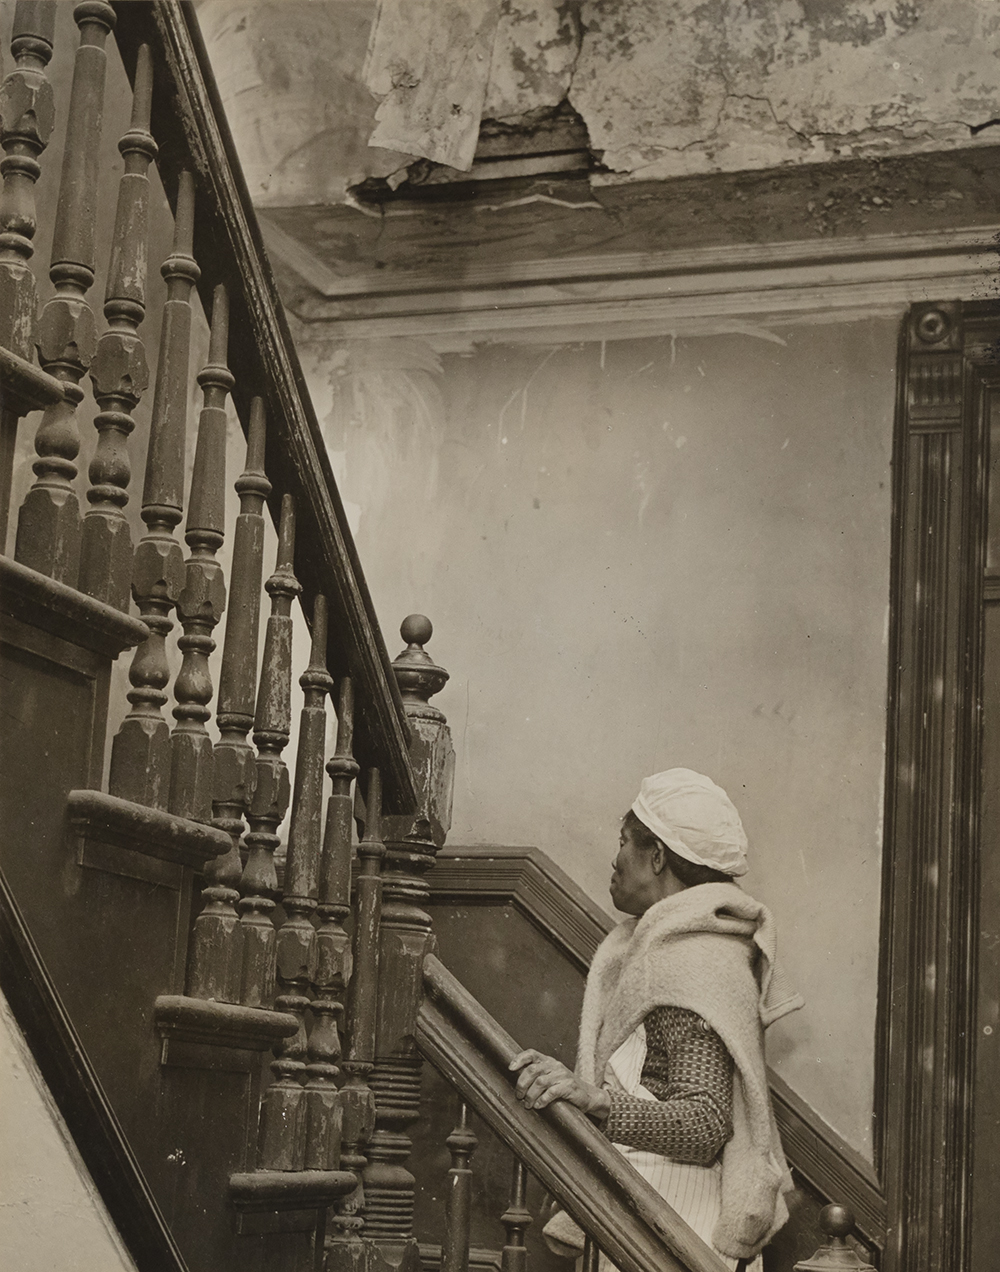 Photograph of a Black woman ascending a turned staircase in a building with crumbling architecture